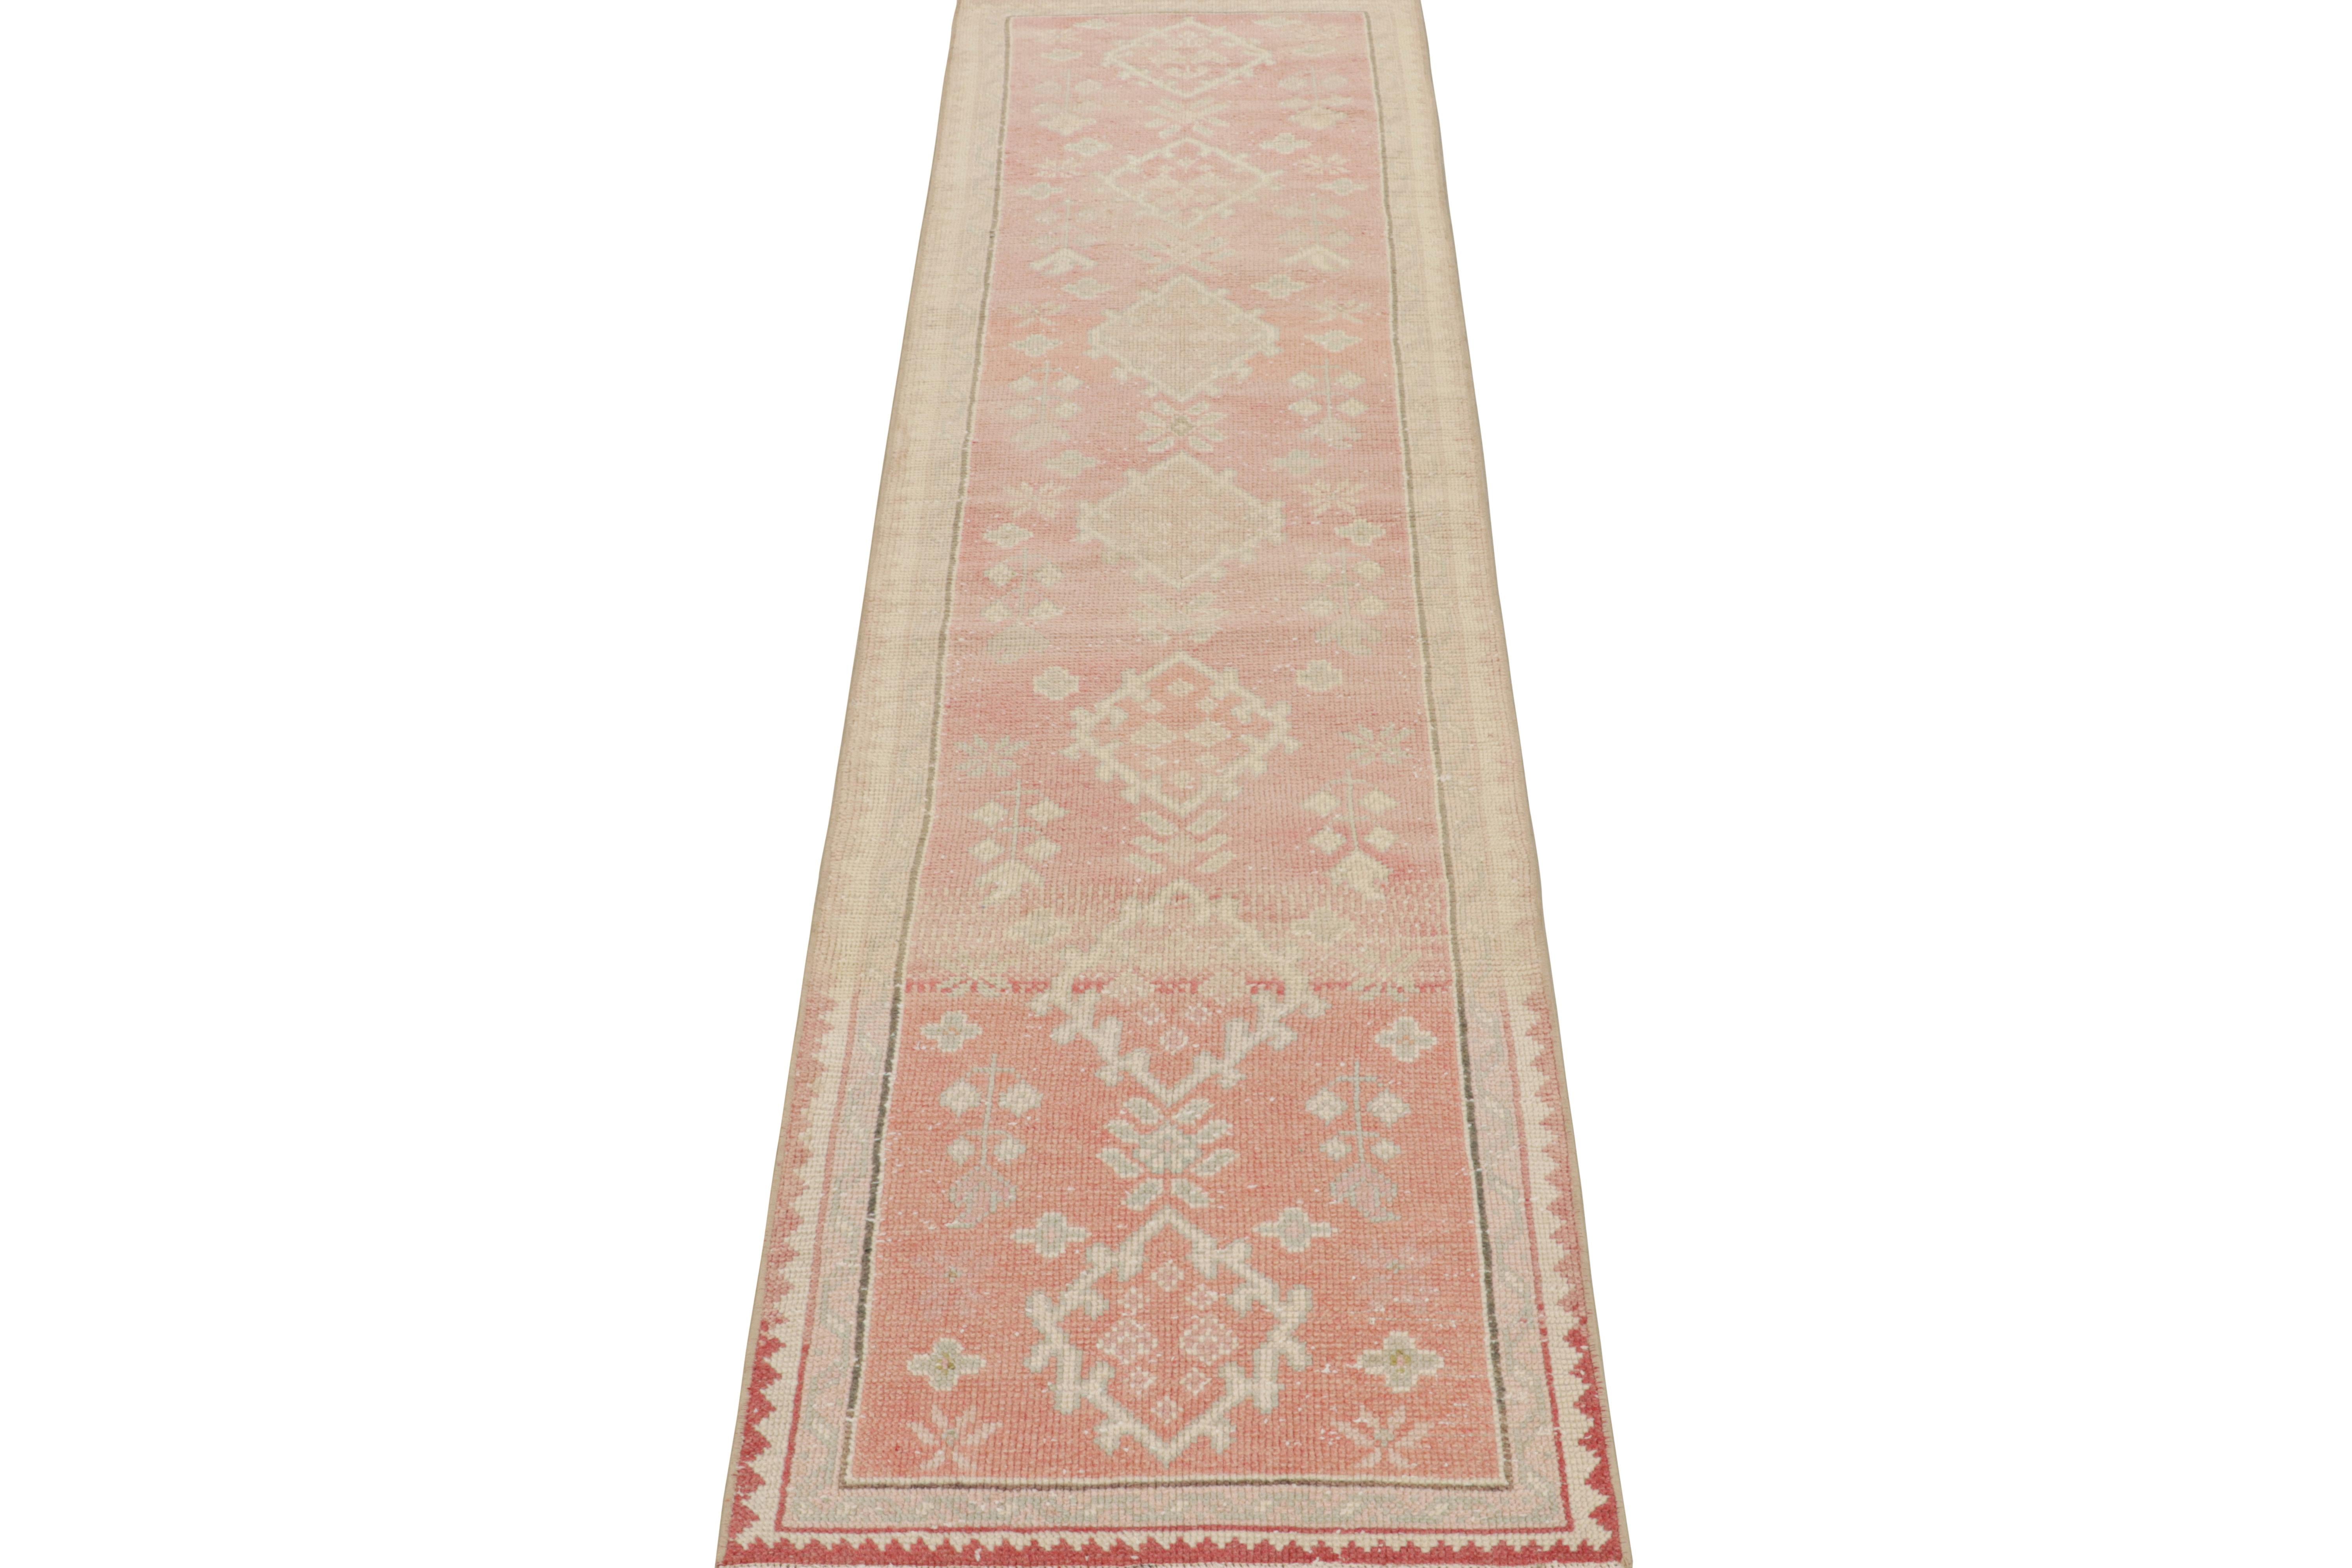 Turkish Vintage Oushak Style Runner Rug in Pink with Geometric Patterns from Rug & Kilim For Sale